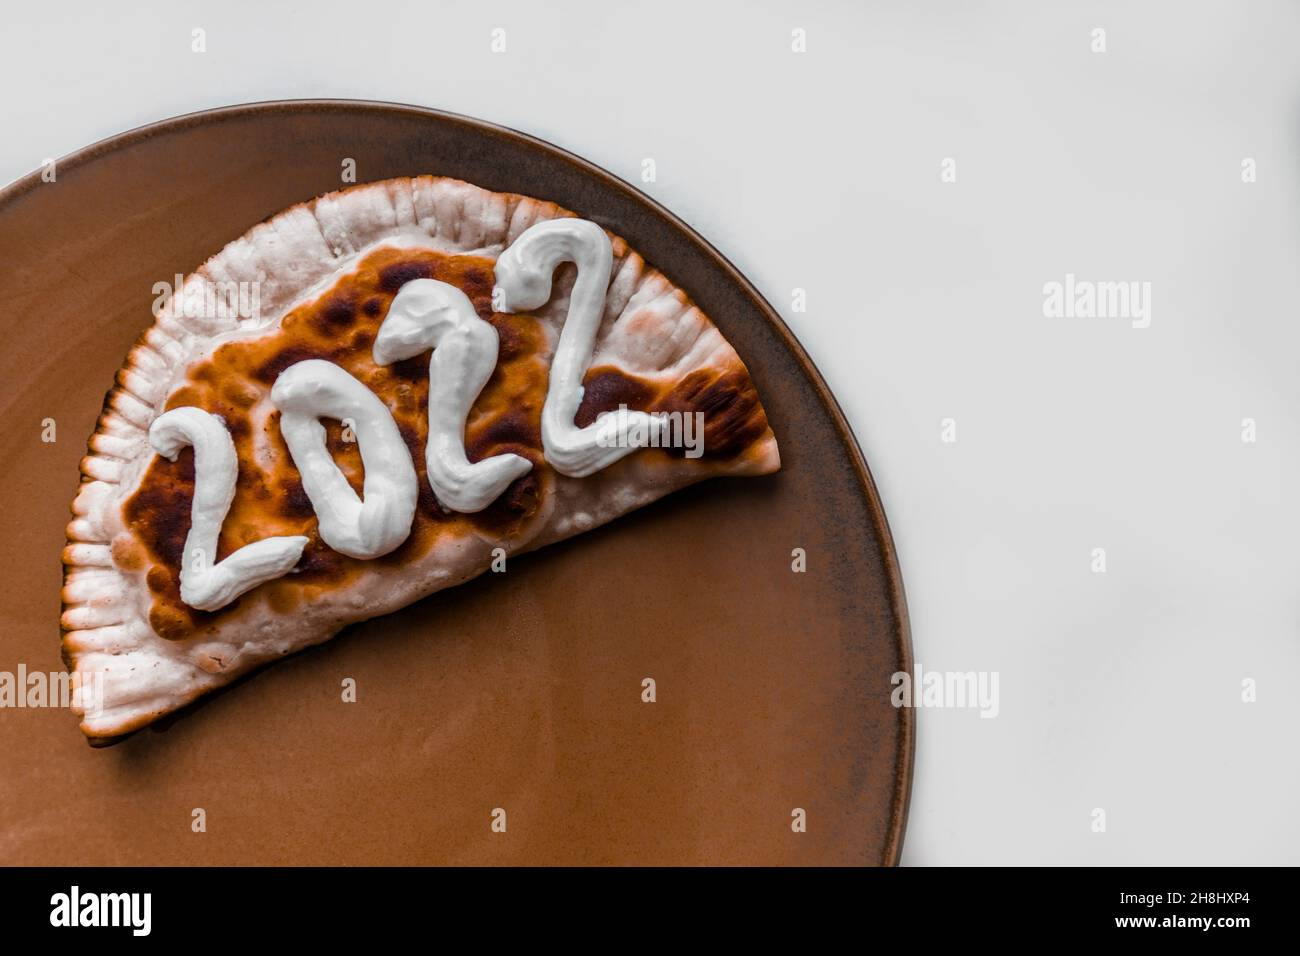 The number 2022 is written on a cheburek. New year 2022 is coming soon. Stock Photo